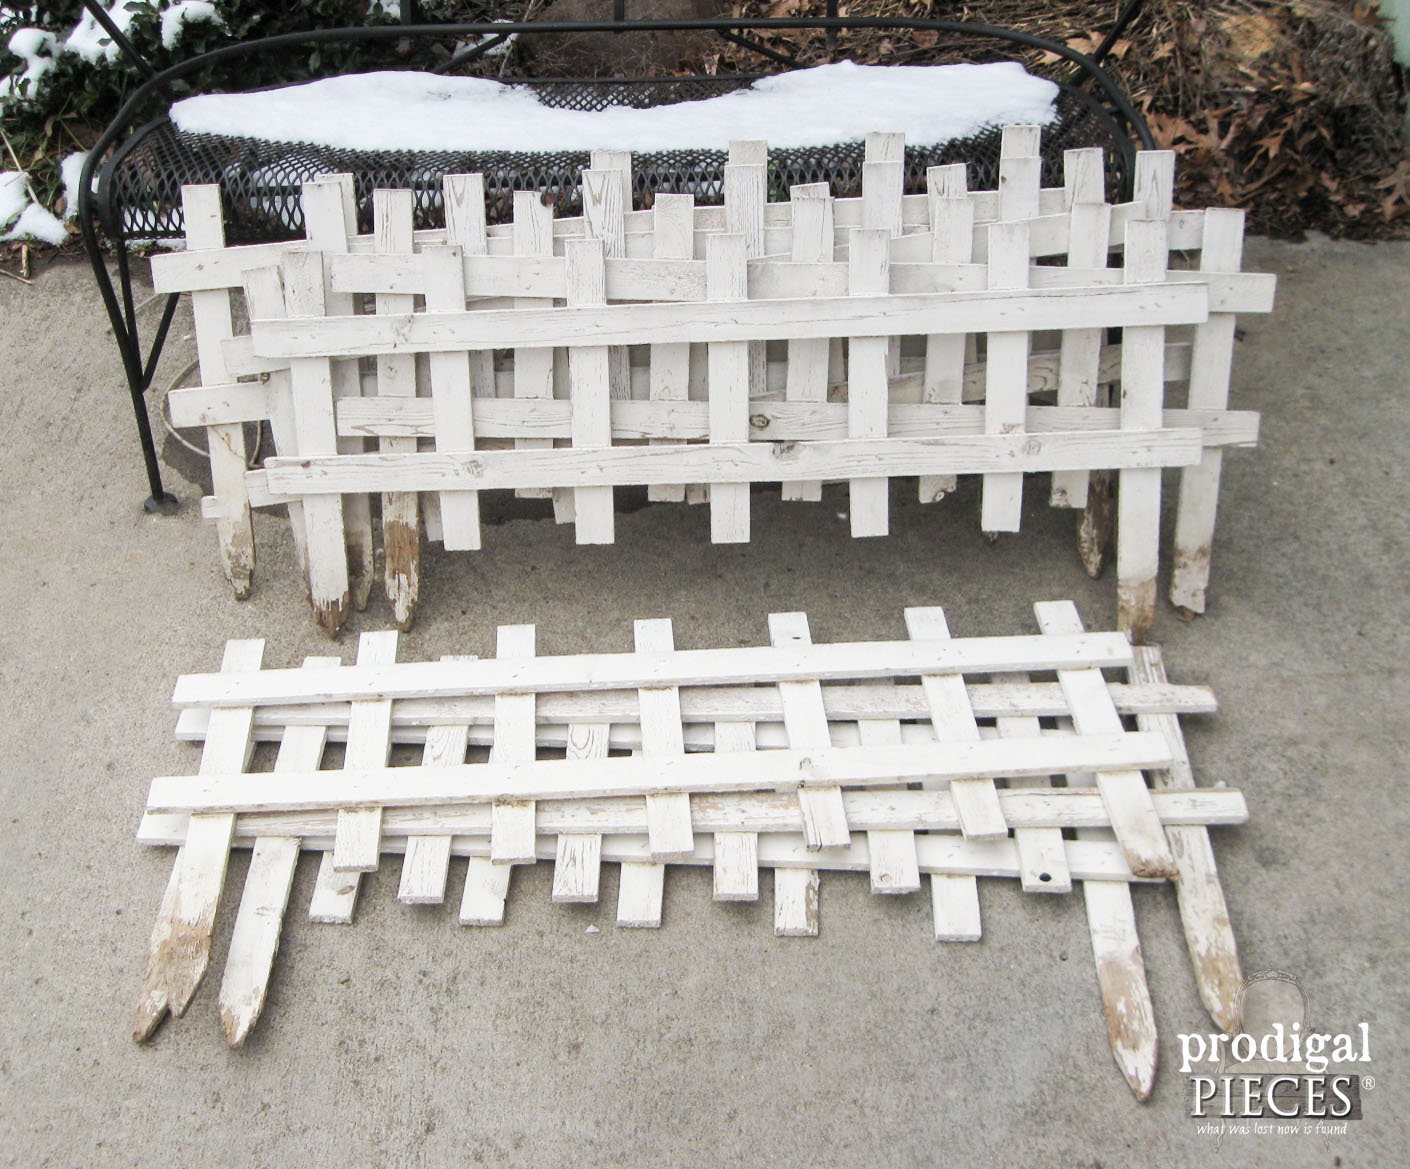 Curbside Garden Picket Fence found Curbside by Prodigal Pieces | www.prodigalpieces.com